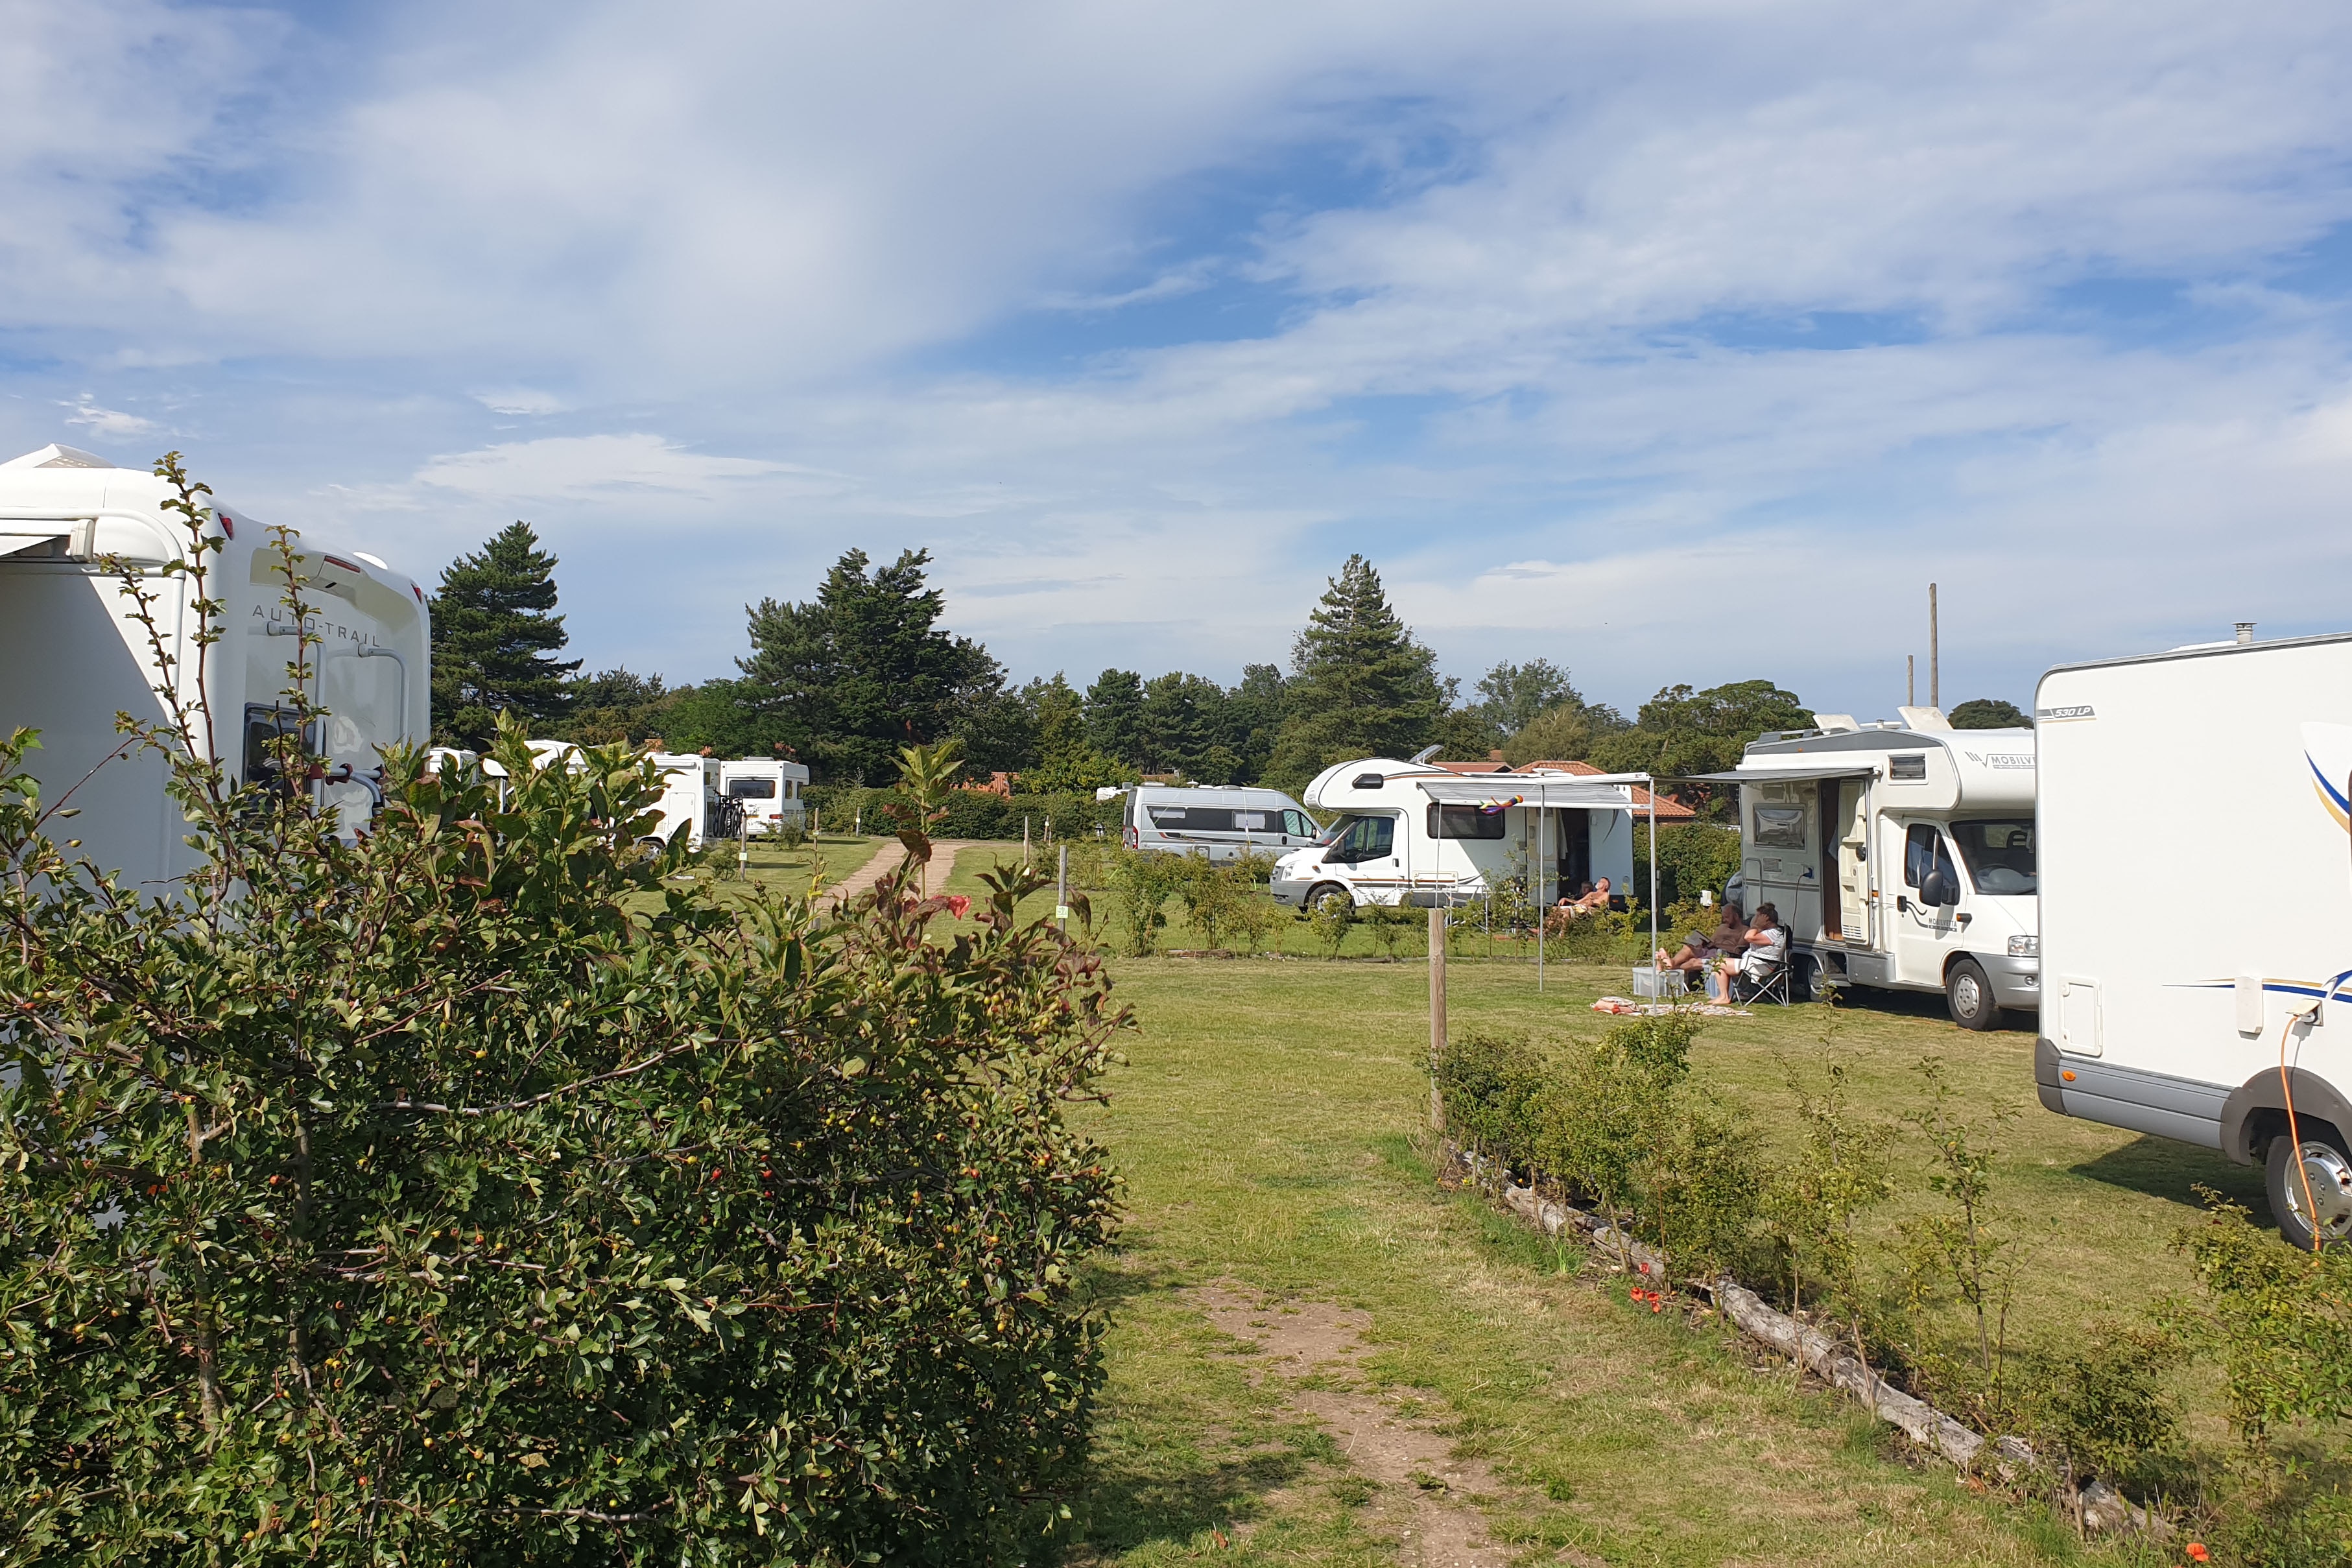 Deepdale Camping